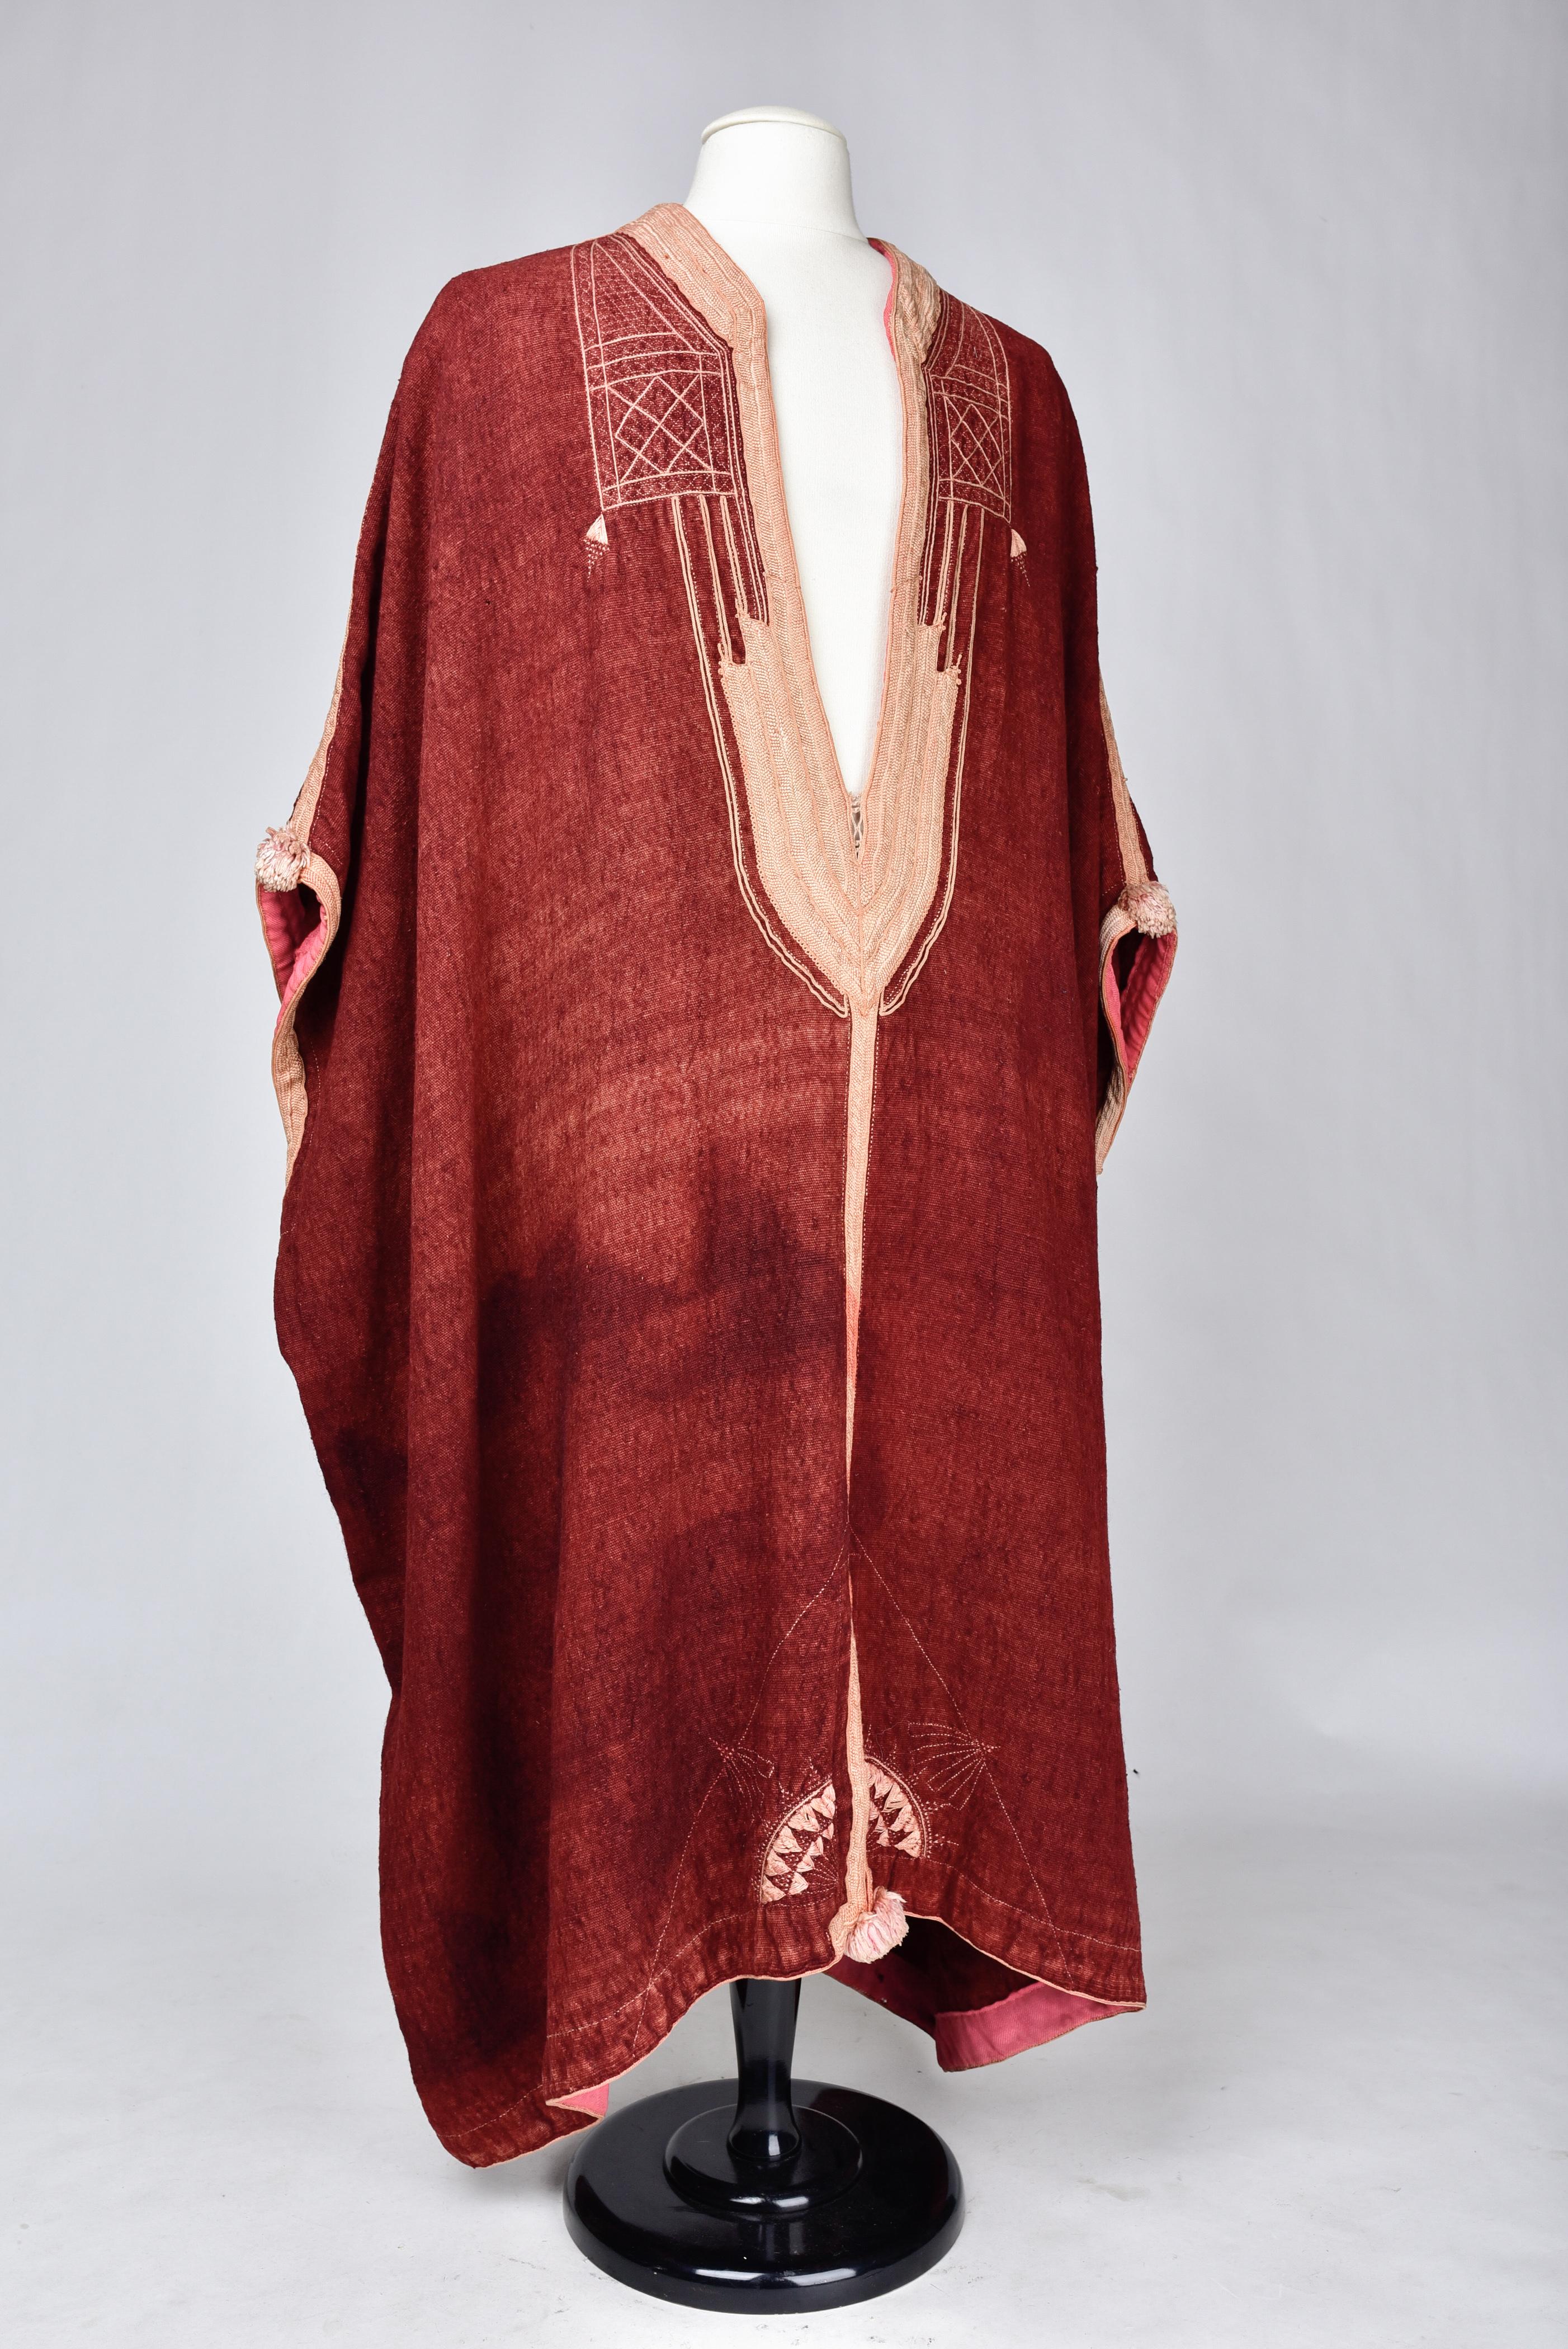 A Berber Djellaba in Dyed Cochineal Embroidered Wool - North Africa Circa 1900 For Sale 6